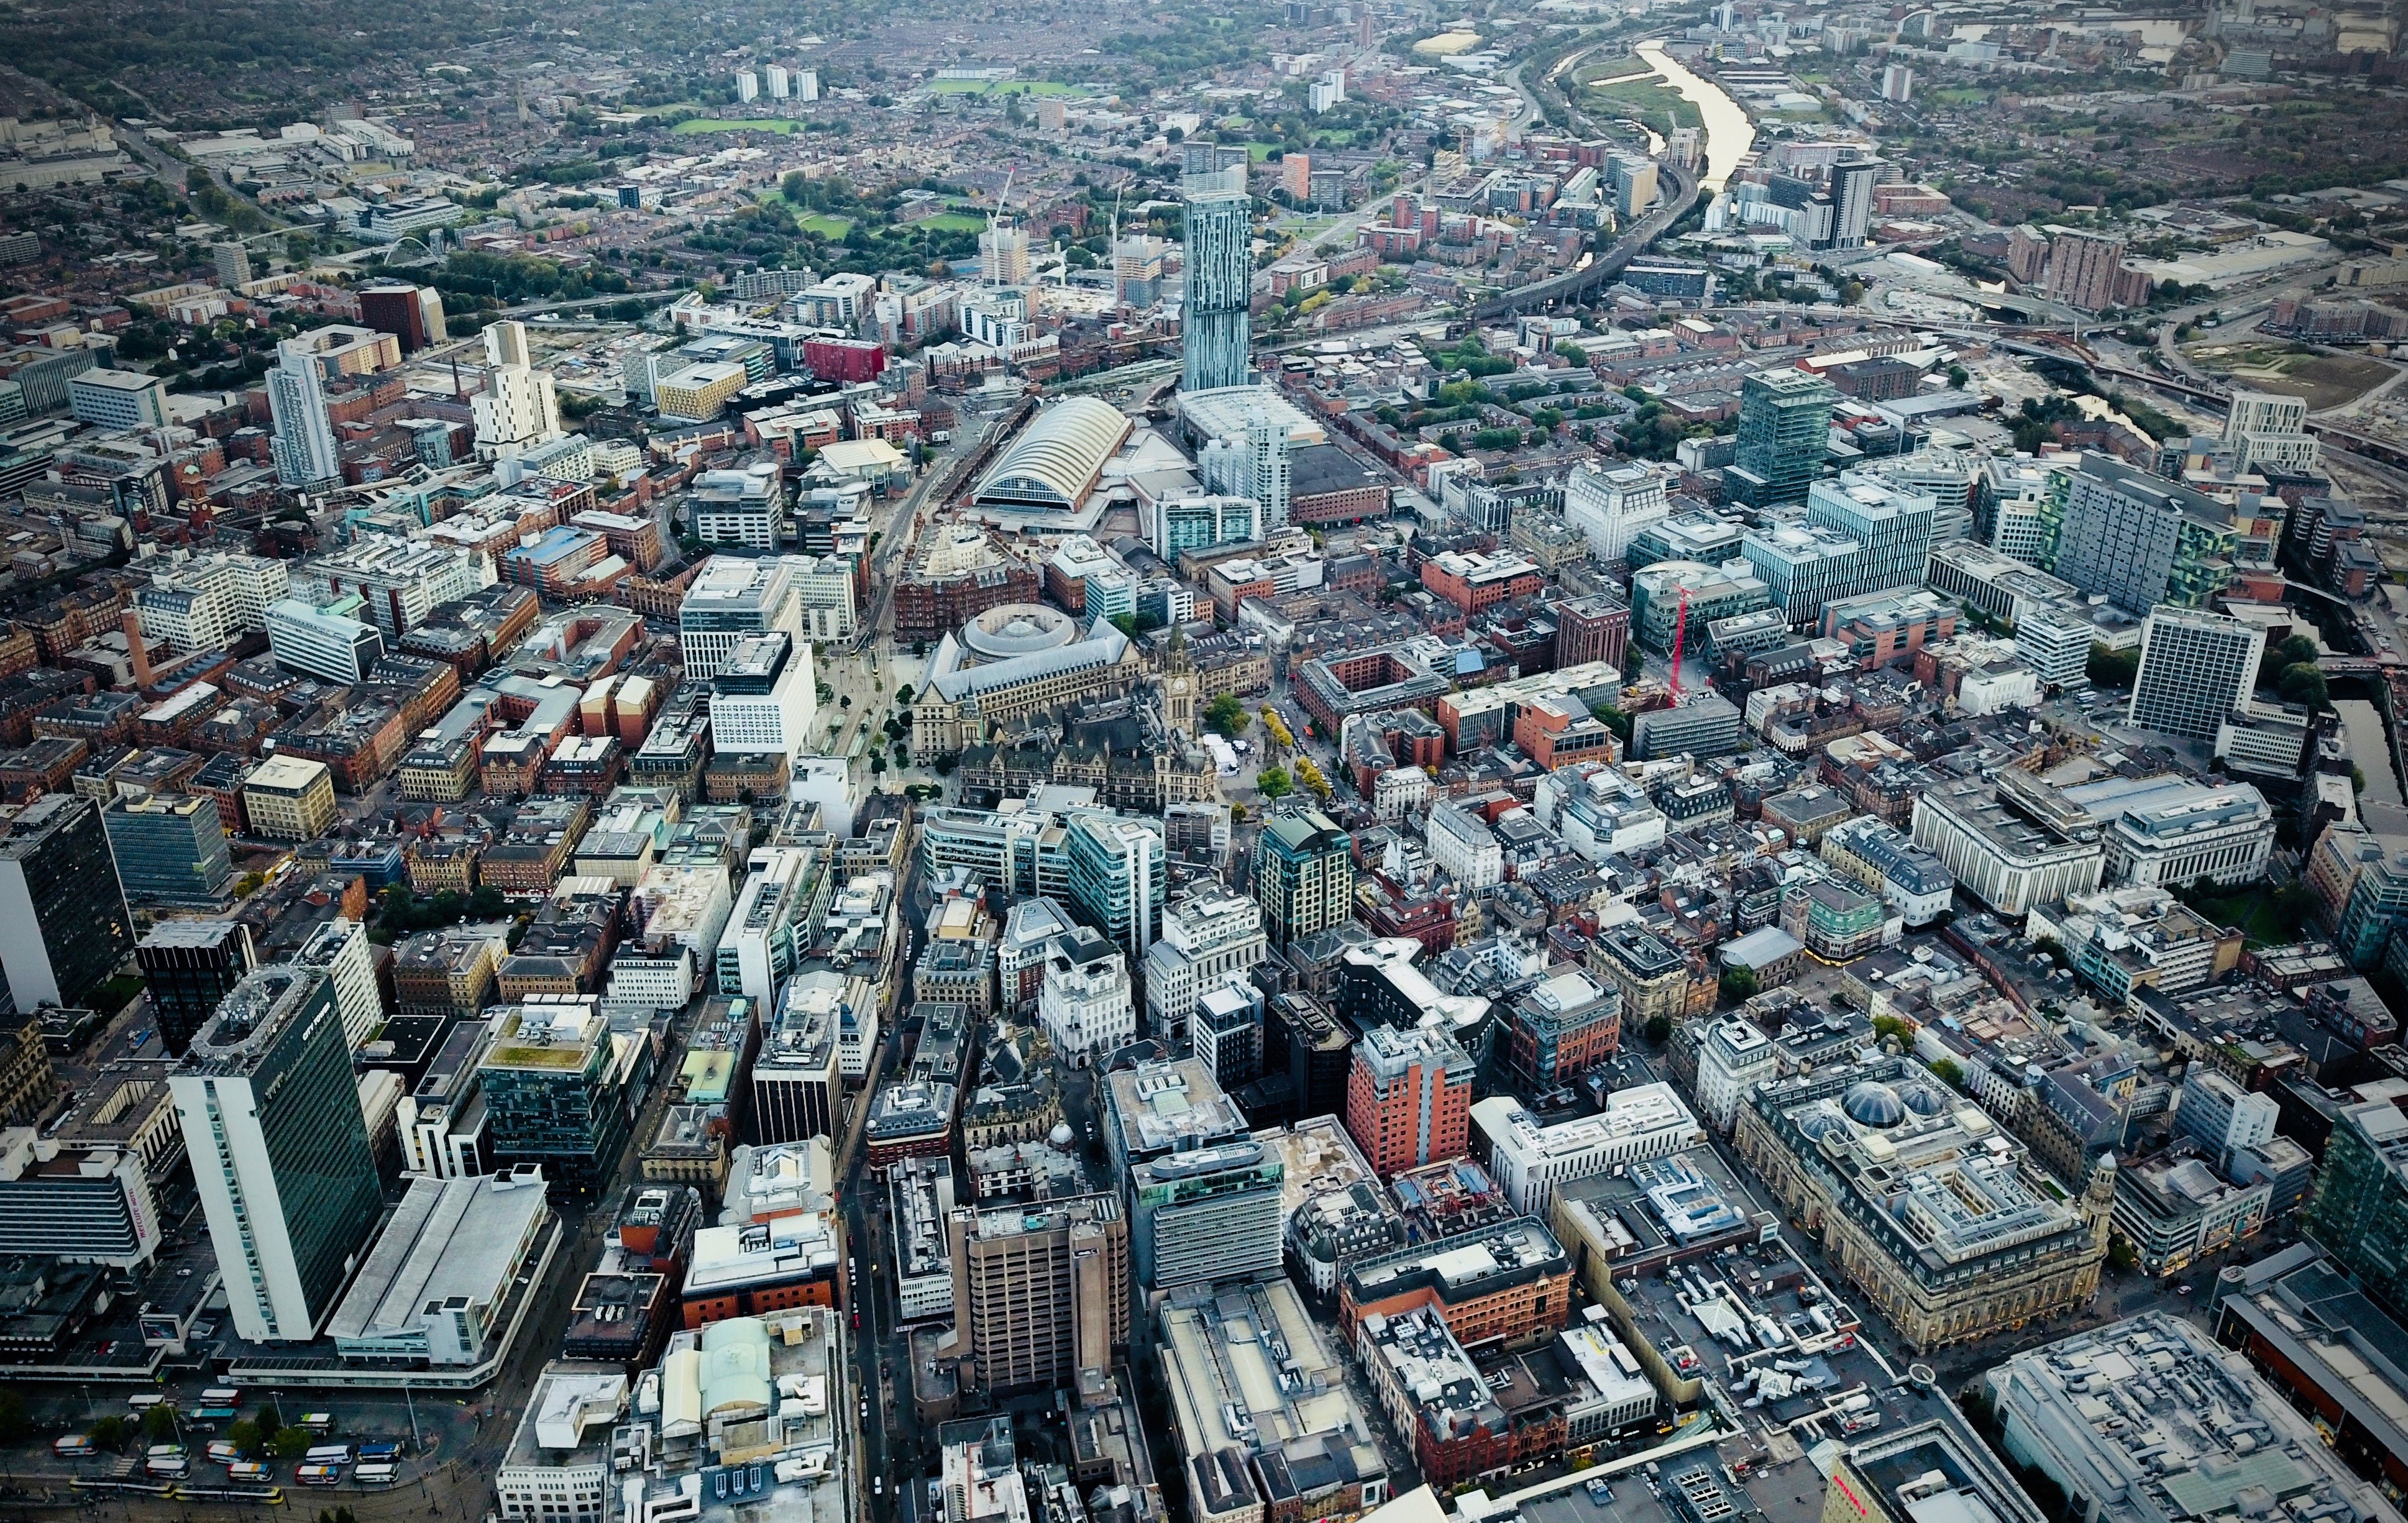 Aerial image of Manchester city centre